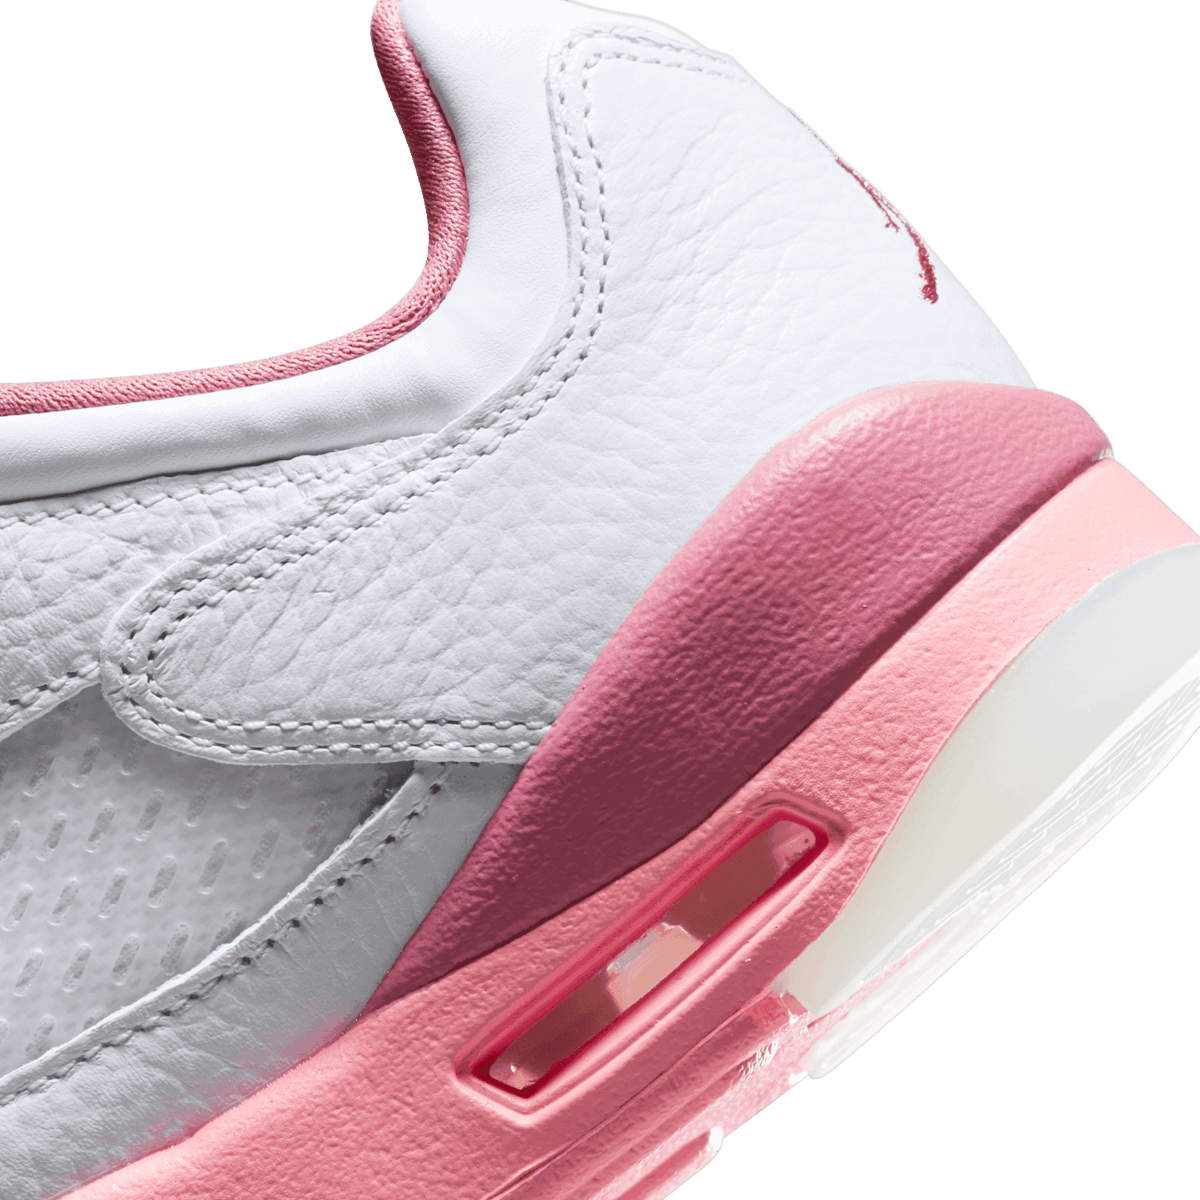 Air Jordan 5 Retro Low Crafted For Her (GS) Angle 5